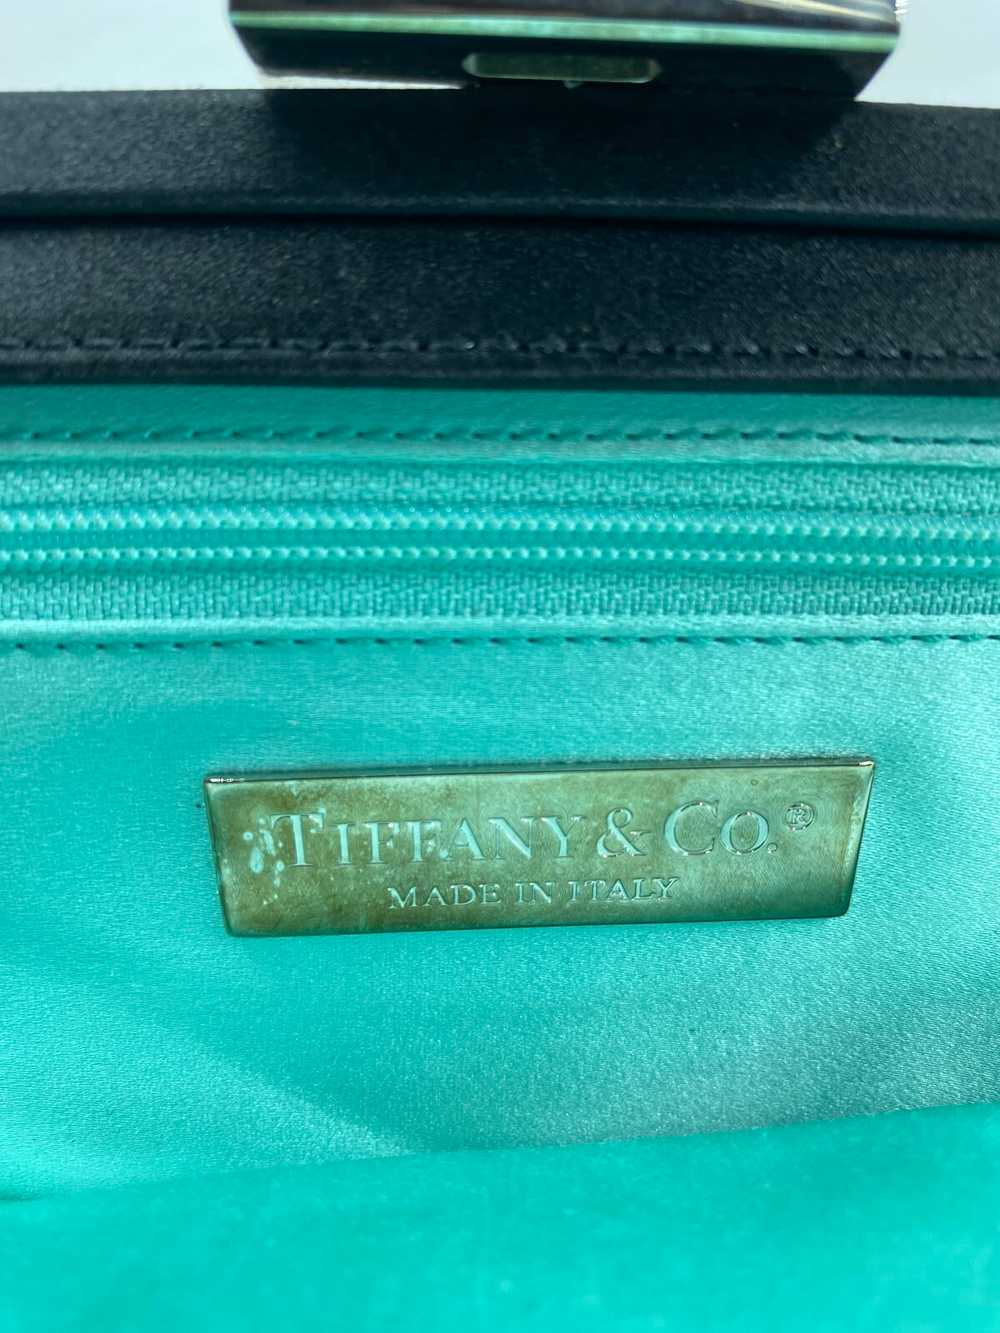 Authentic Tiffany & Co. Satin Clutch - image 4